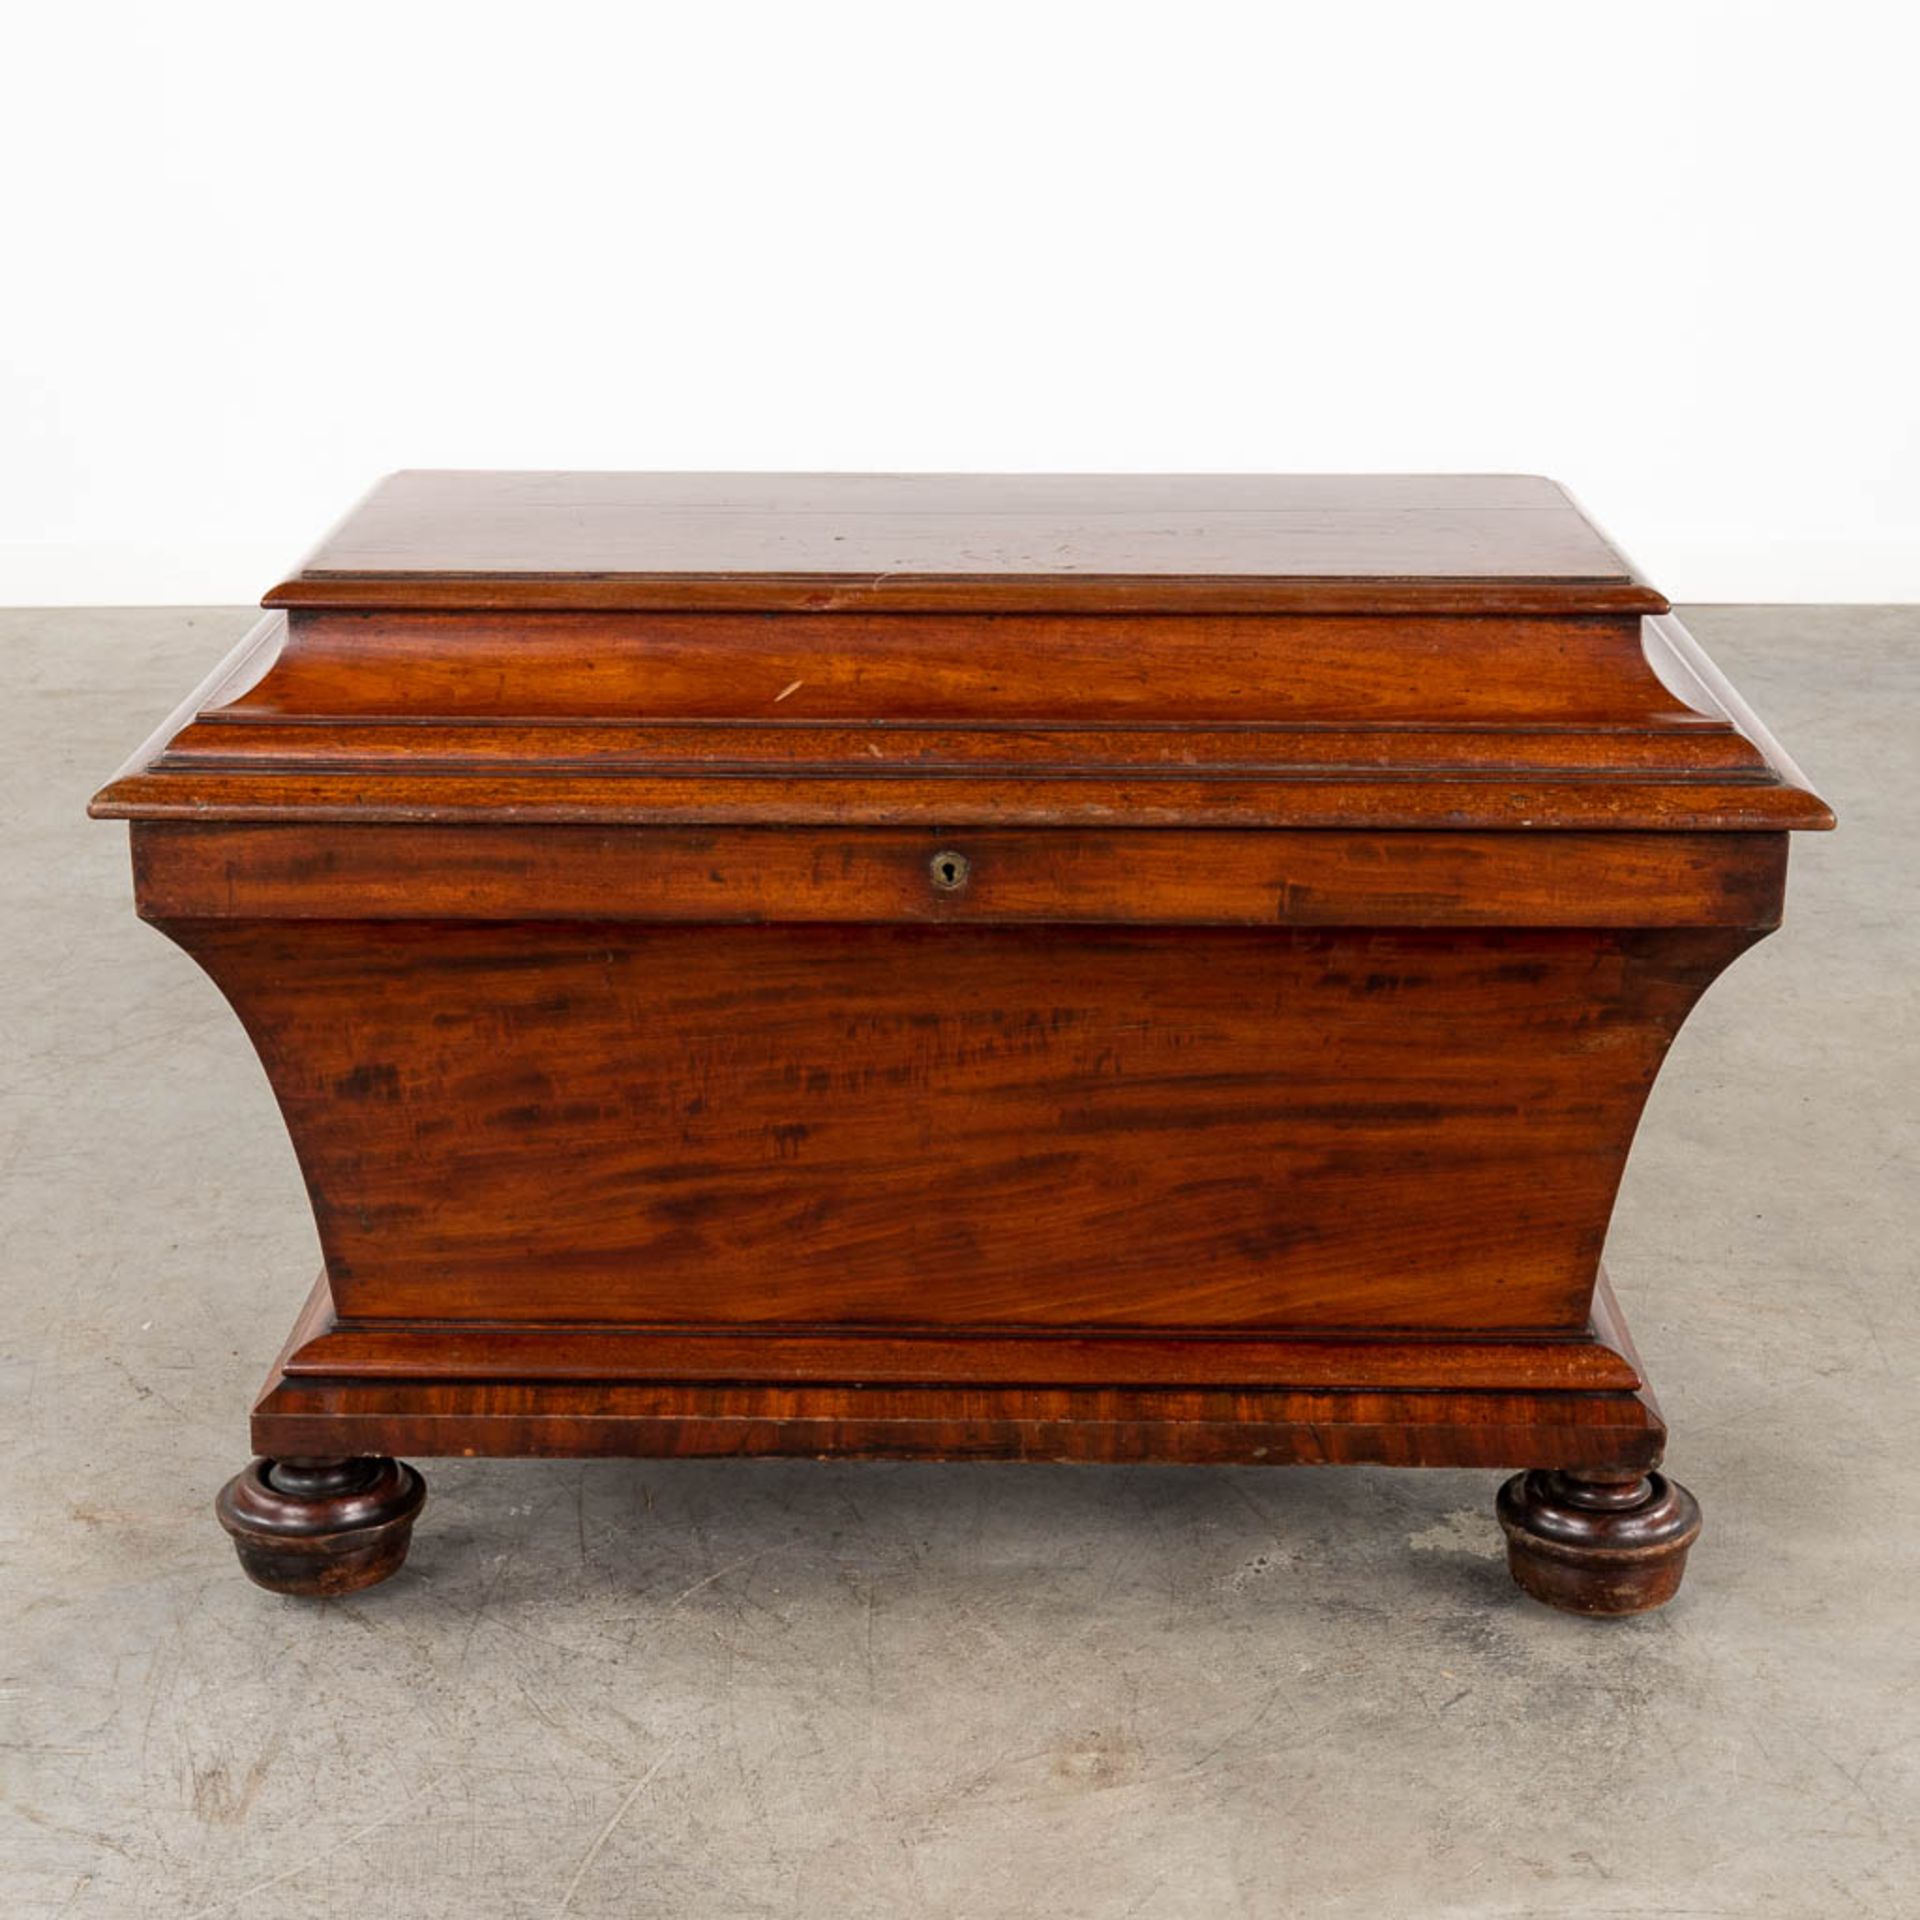 An exceptionally large English Cellarette or Wine Cooler, Mahogany, 19th C. (D:46 x W:79 x H:51 cm) - Image 6 of 13